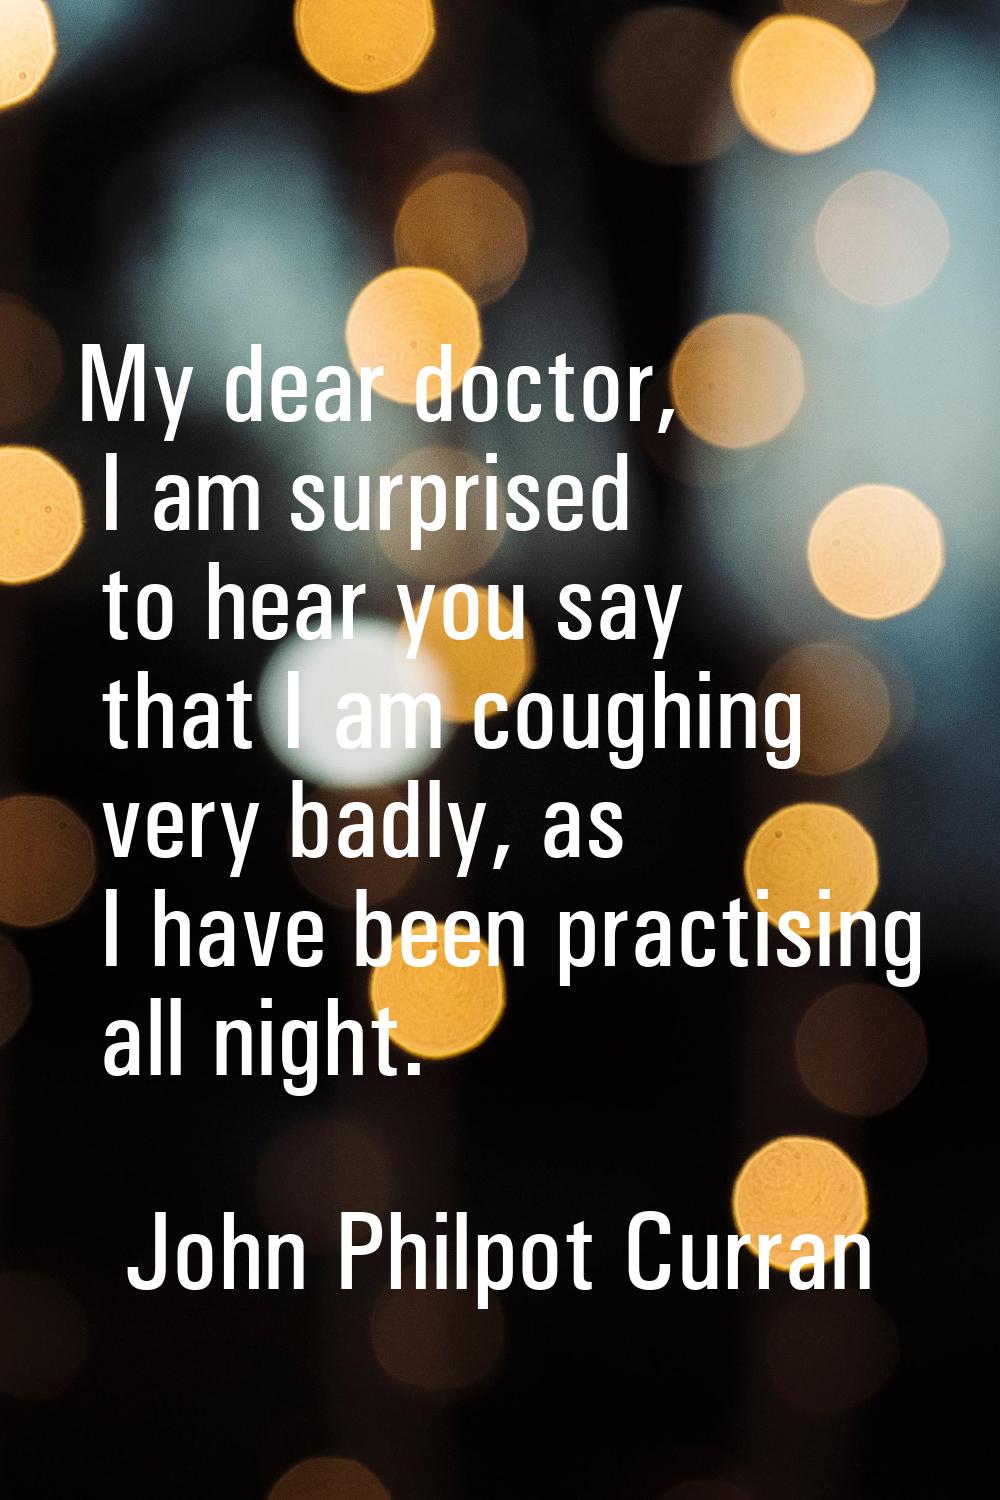 My dear doctor, I am surprised to hear you say that I am coughing very badly, as I have been practi